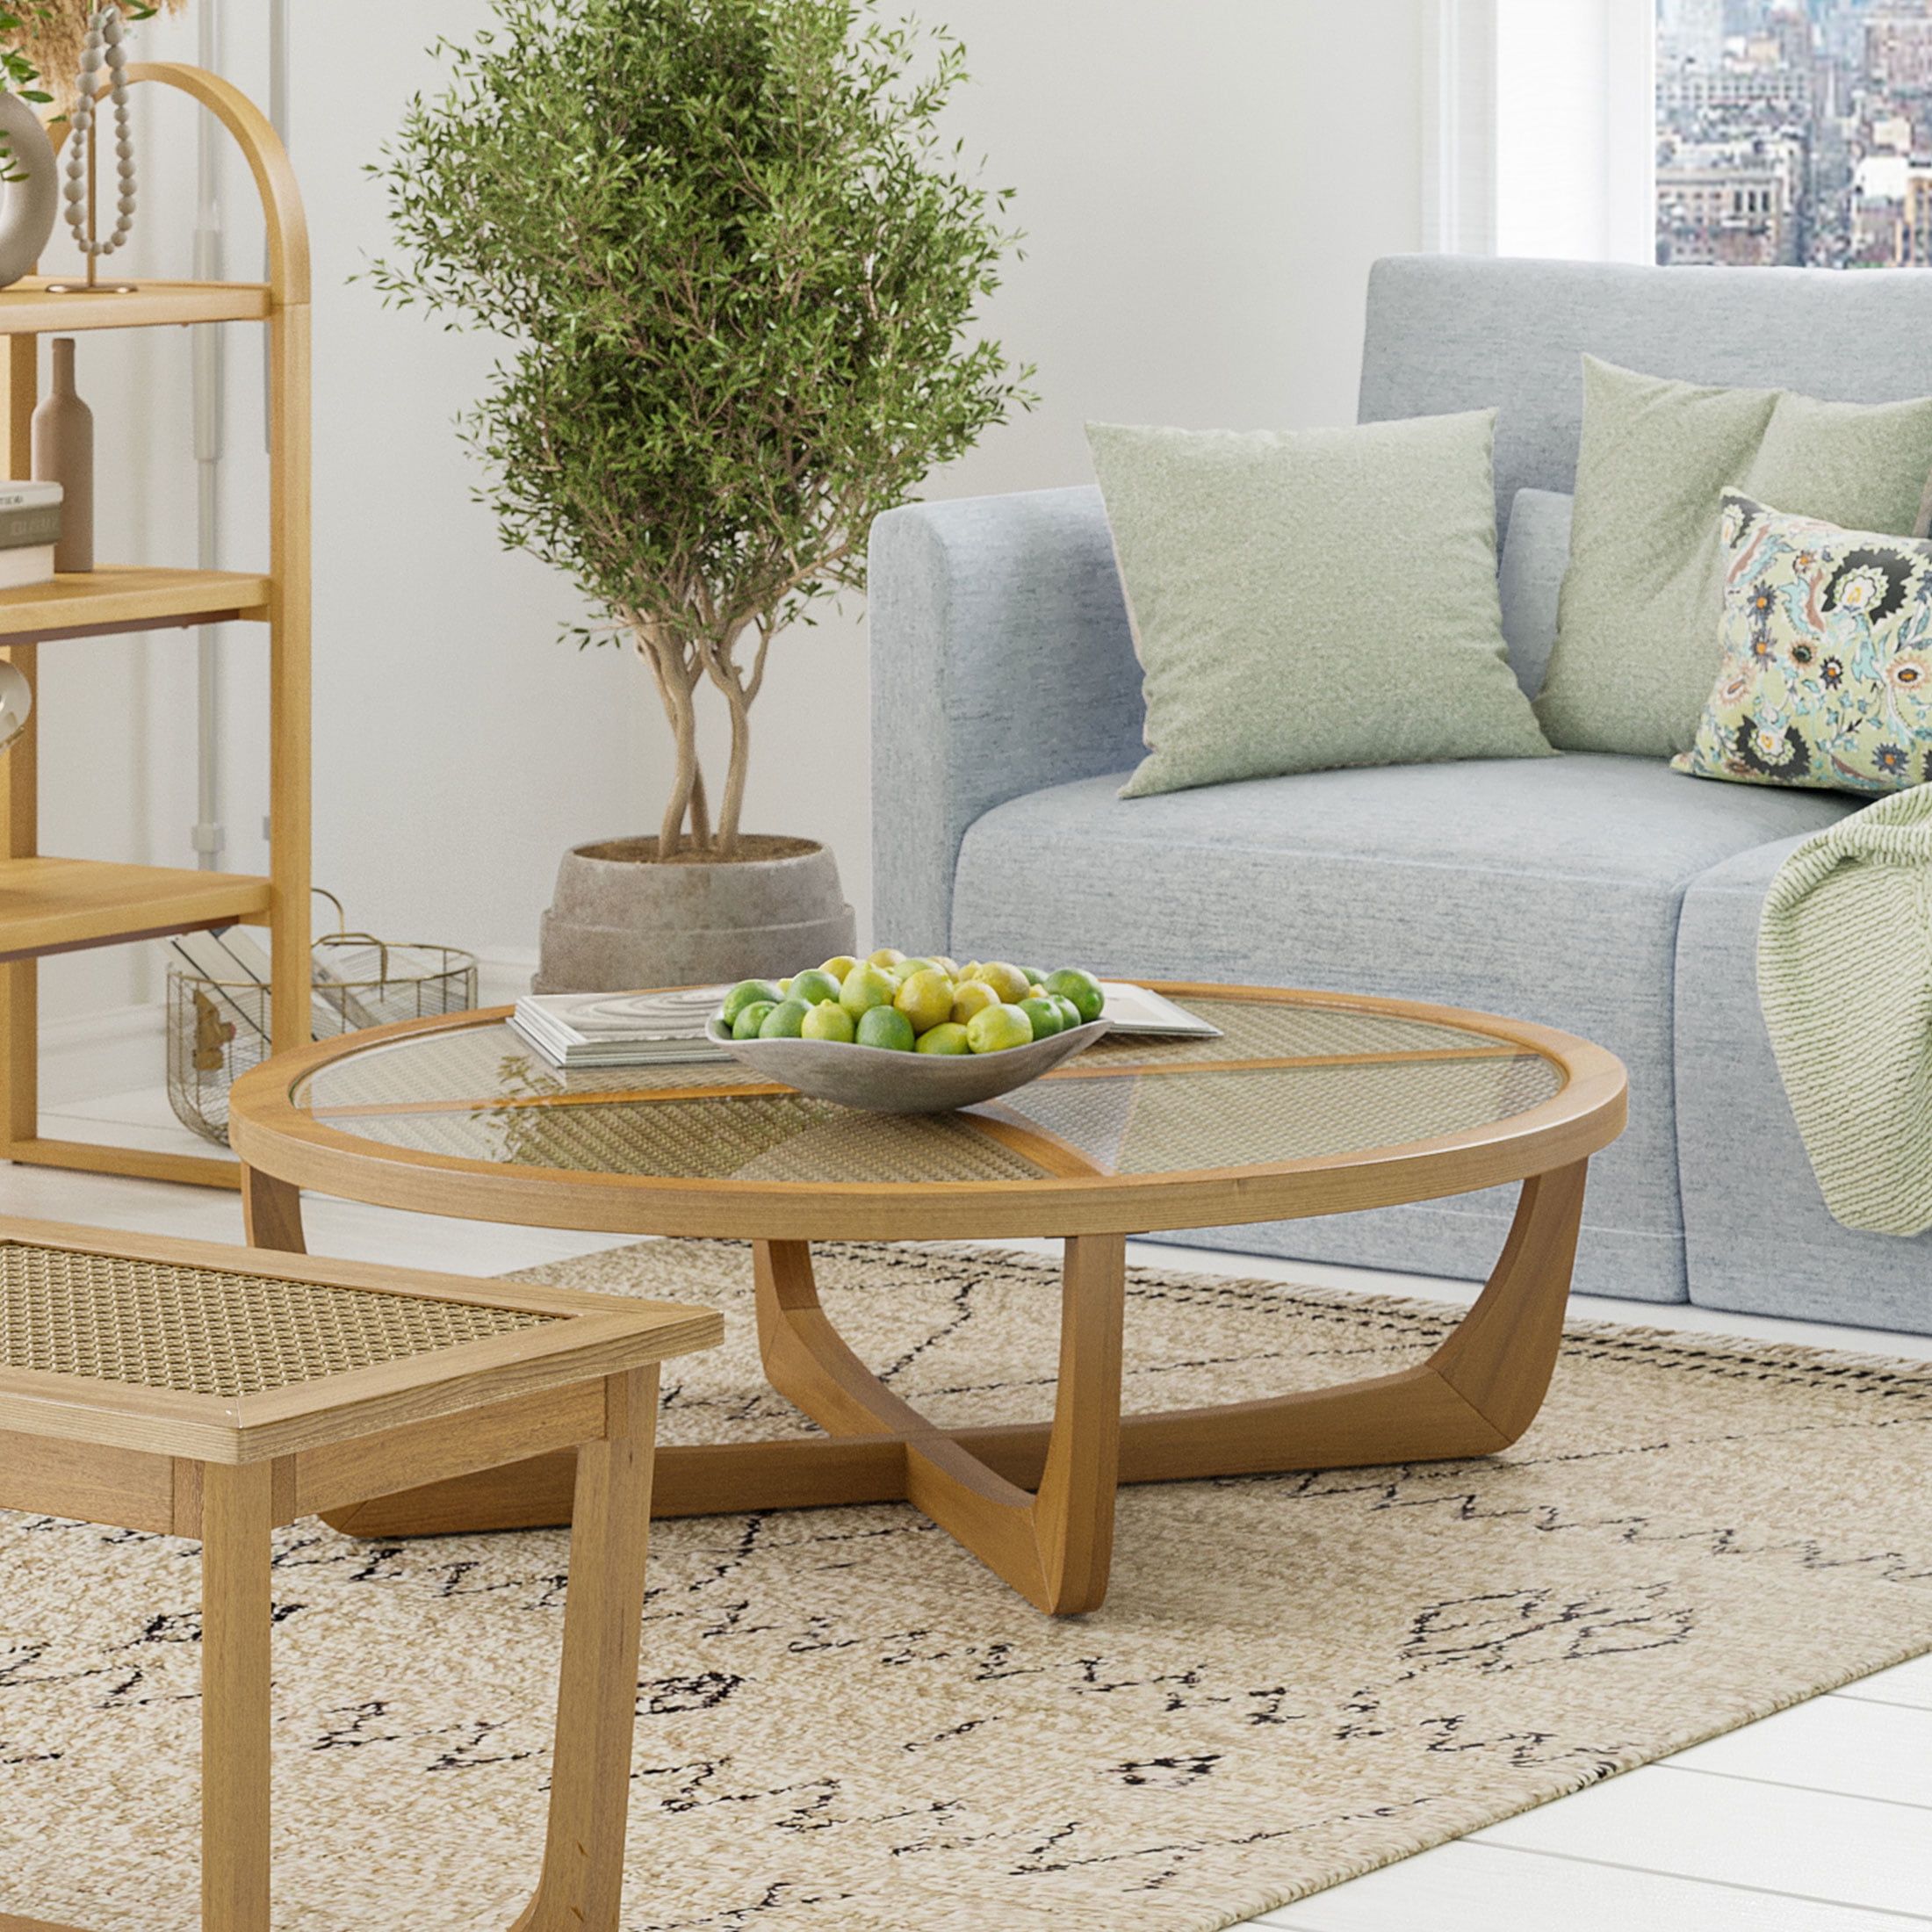 Beautiful Rattan & Glass Coffee Table With Solid Wood Framedrew  Barrymore – Walmart Pertaining To Latest Rattan Coffee Tables (Photo 4 of 10)